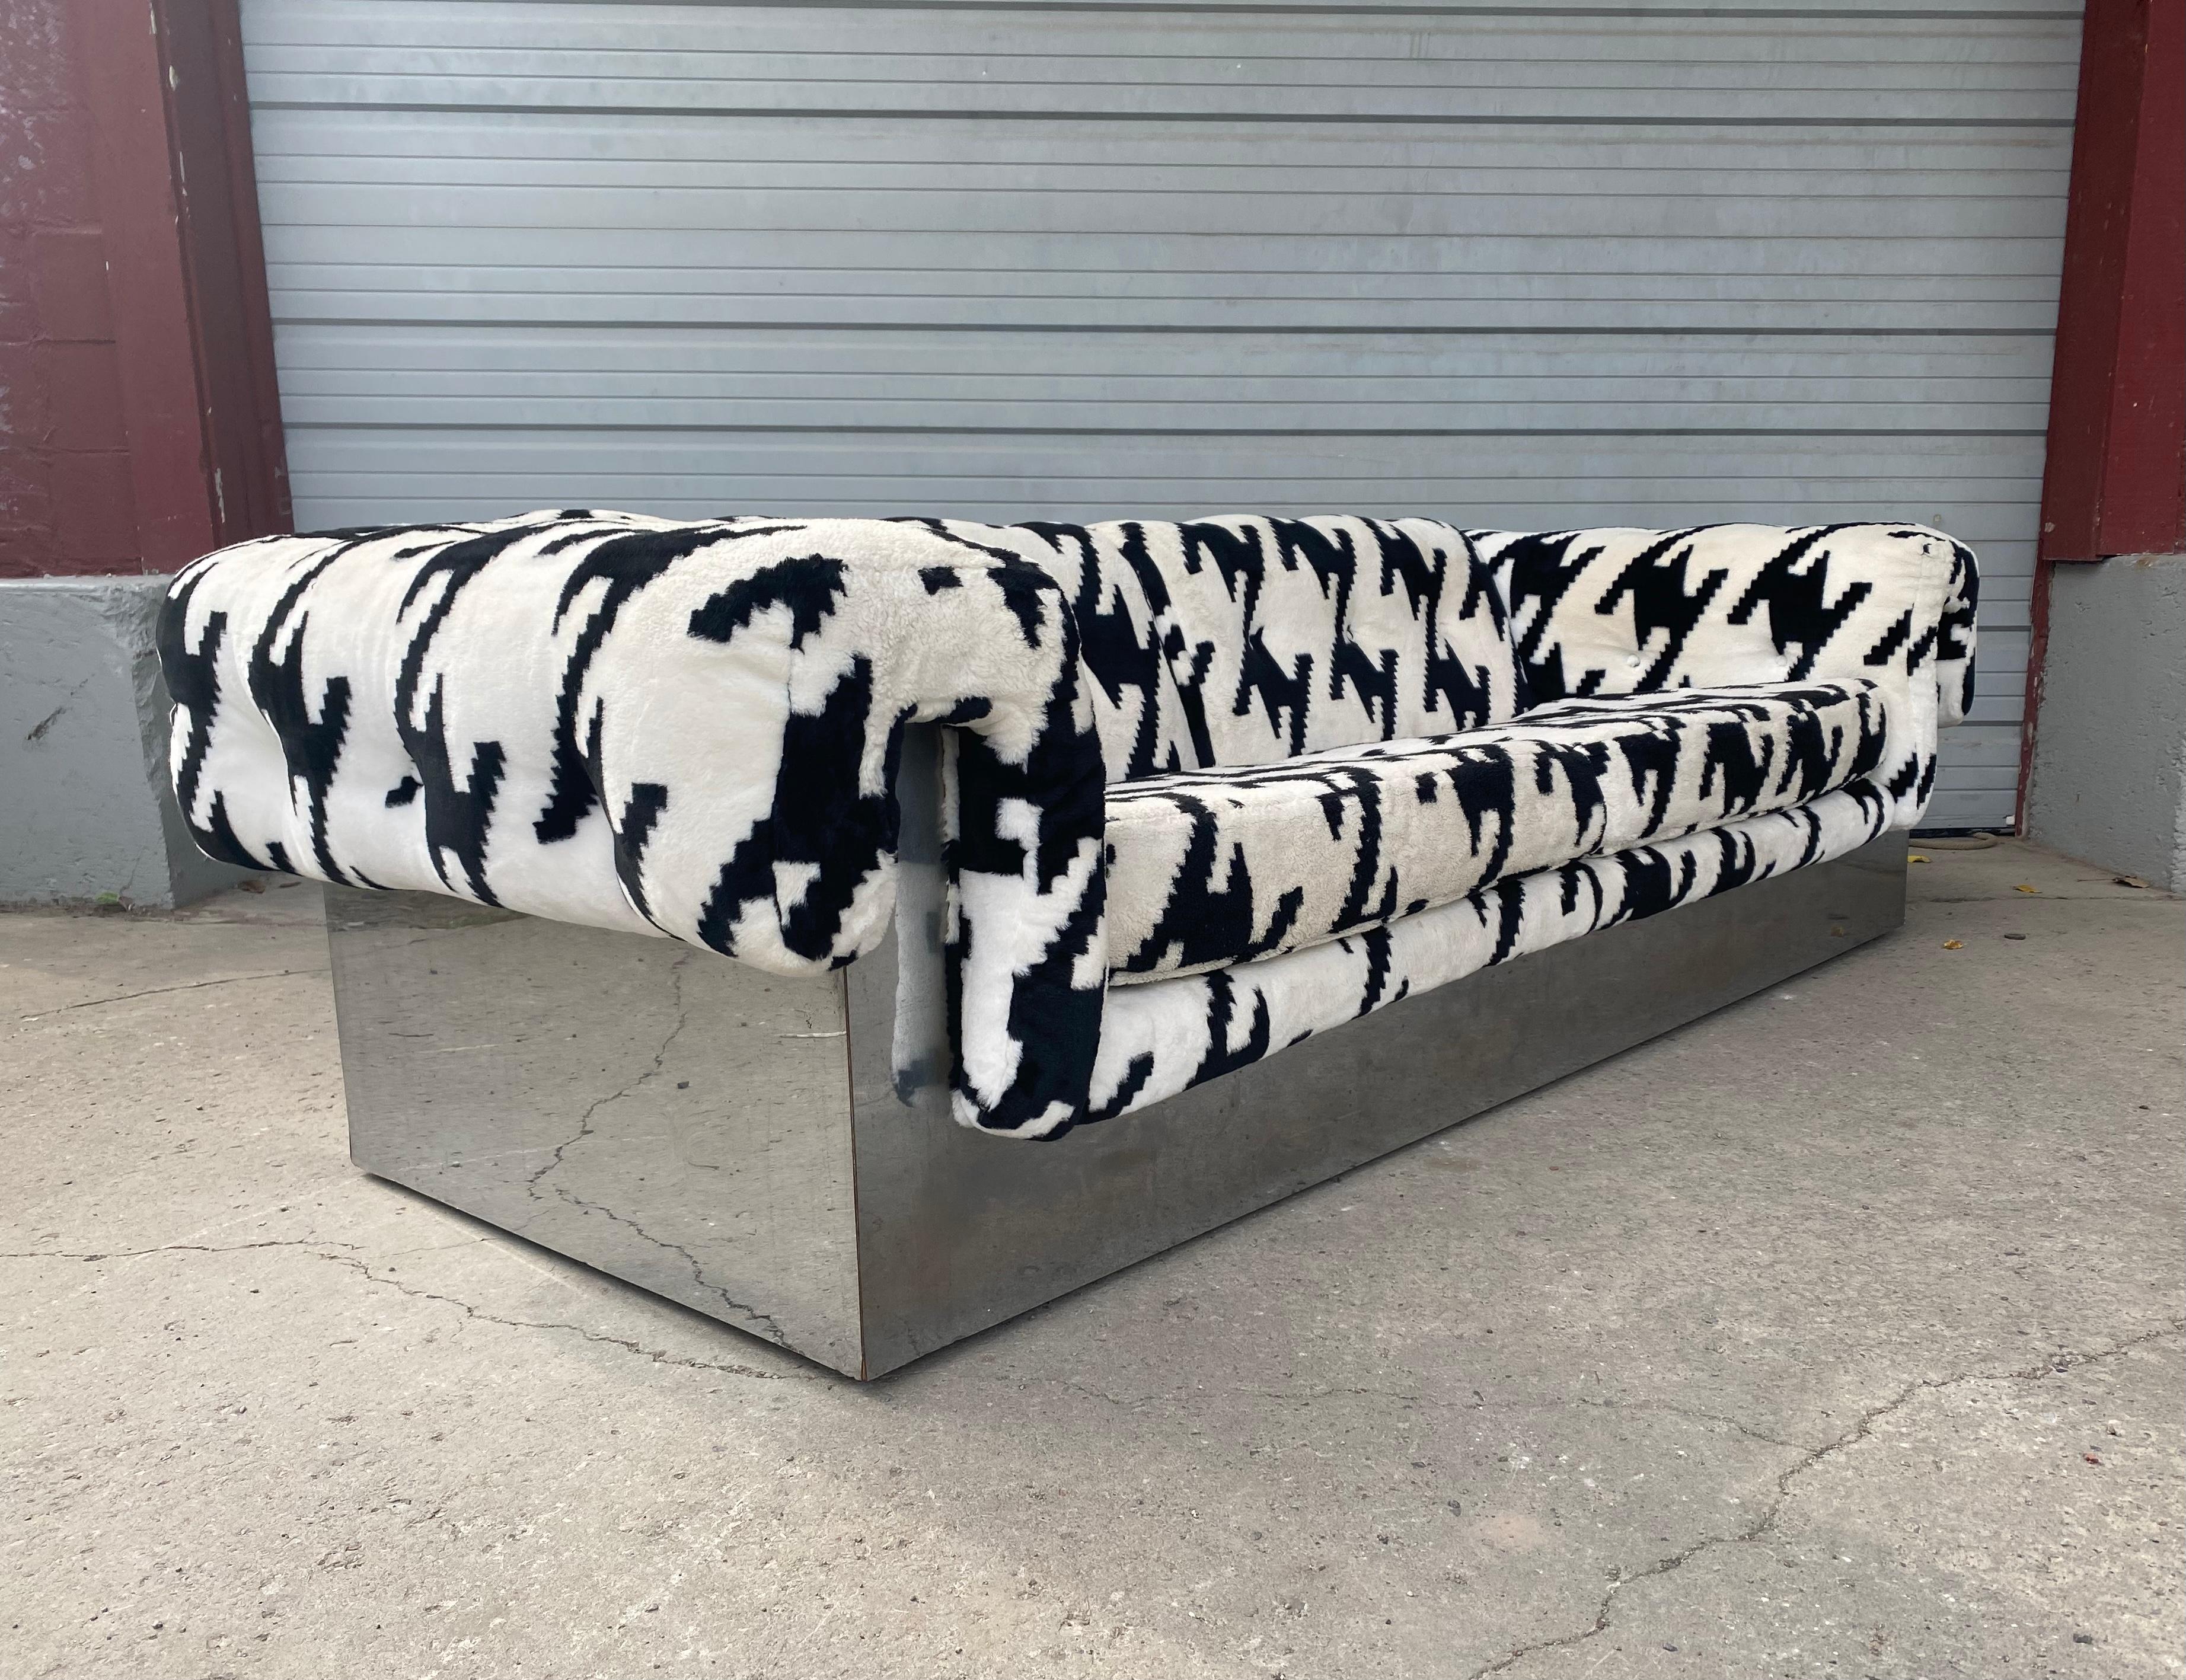 Outrageous Pop modern button tufted sofa designed by Milo Baughman for Thayer Coggin, Chrome wraps entire base and forms support for the button-tufted arms and back. Elegant from every angle-his best sofa design. Retains original hounds-tooth (flame